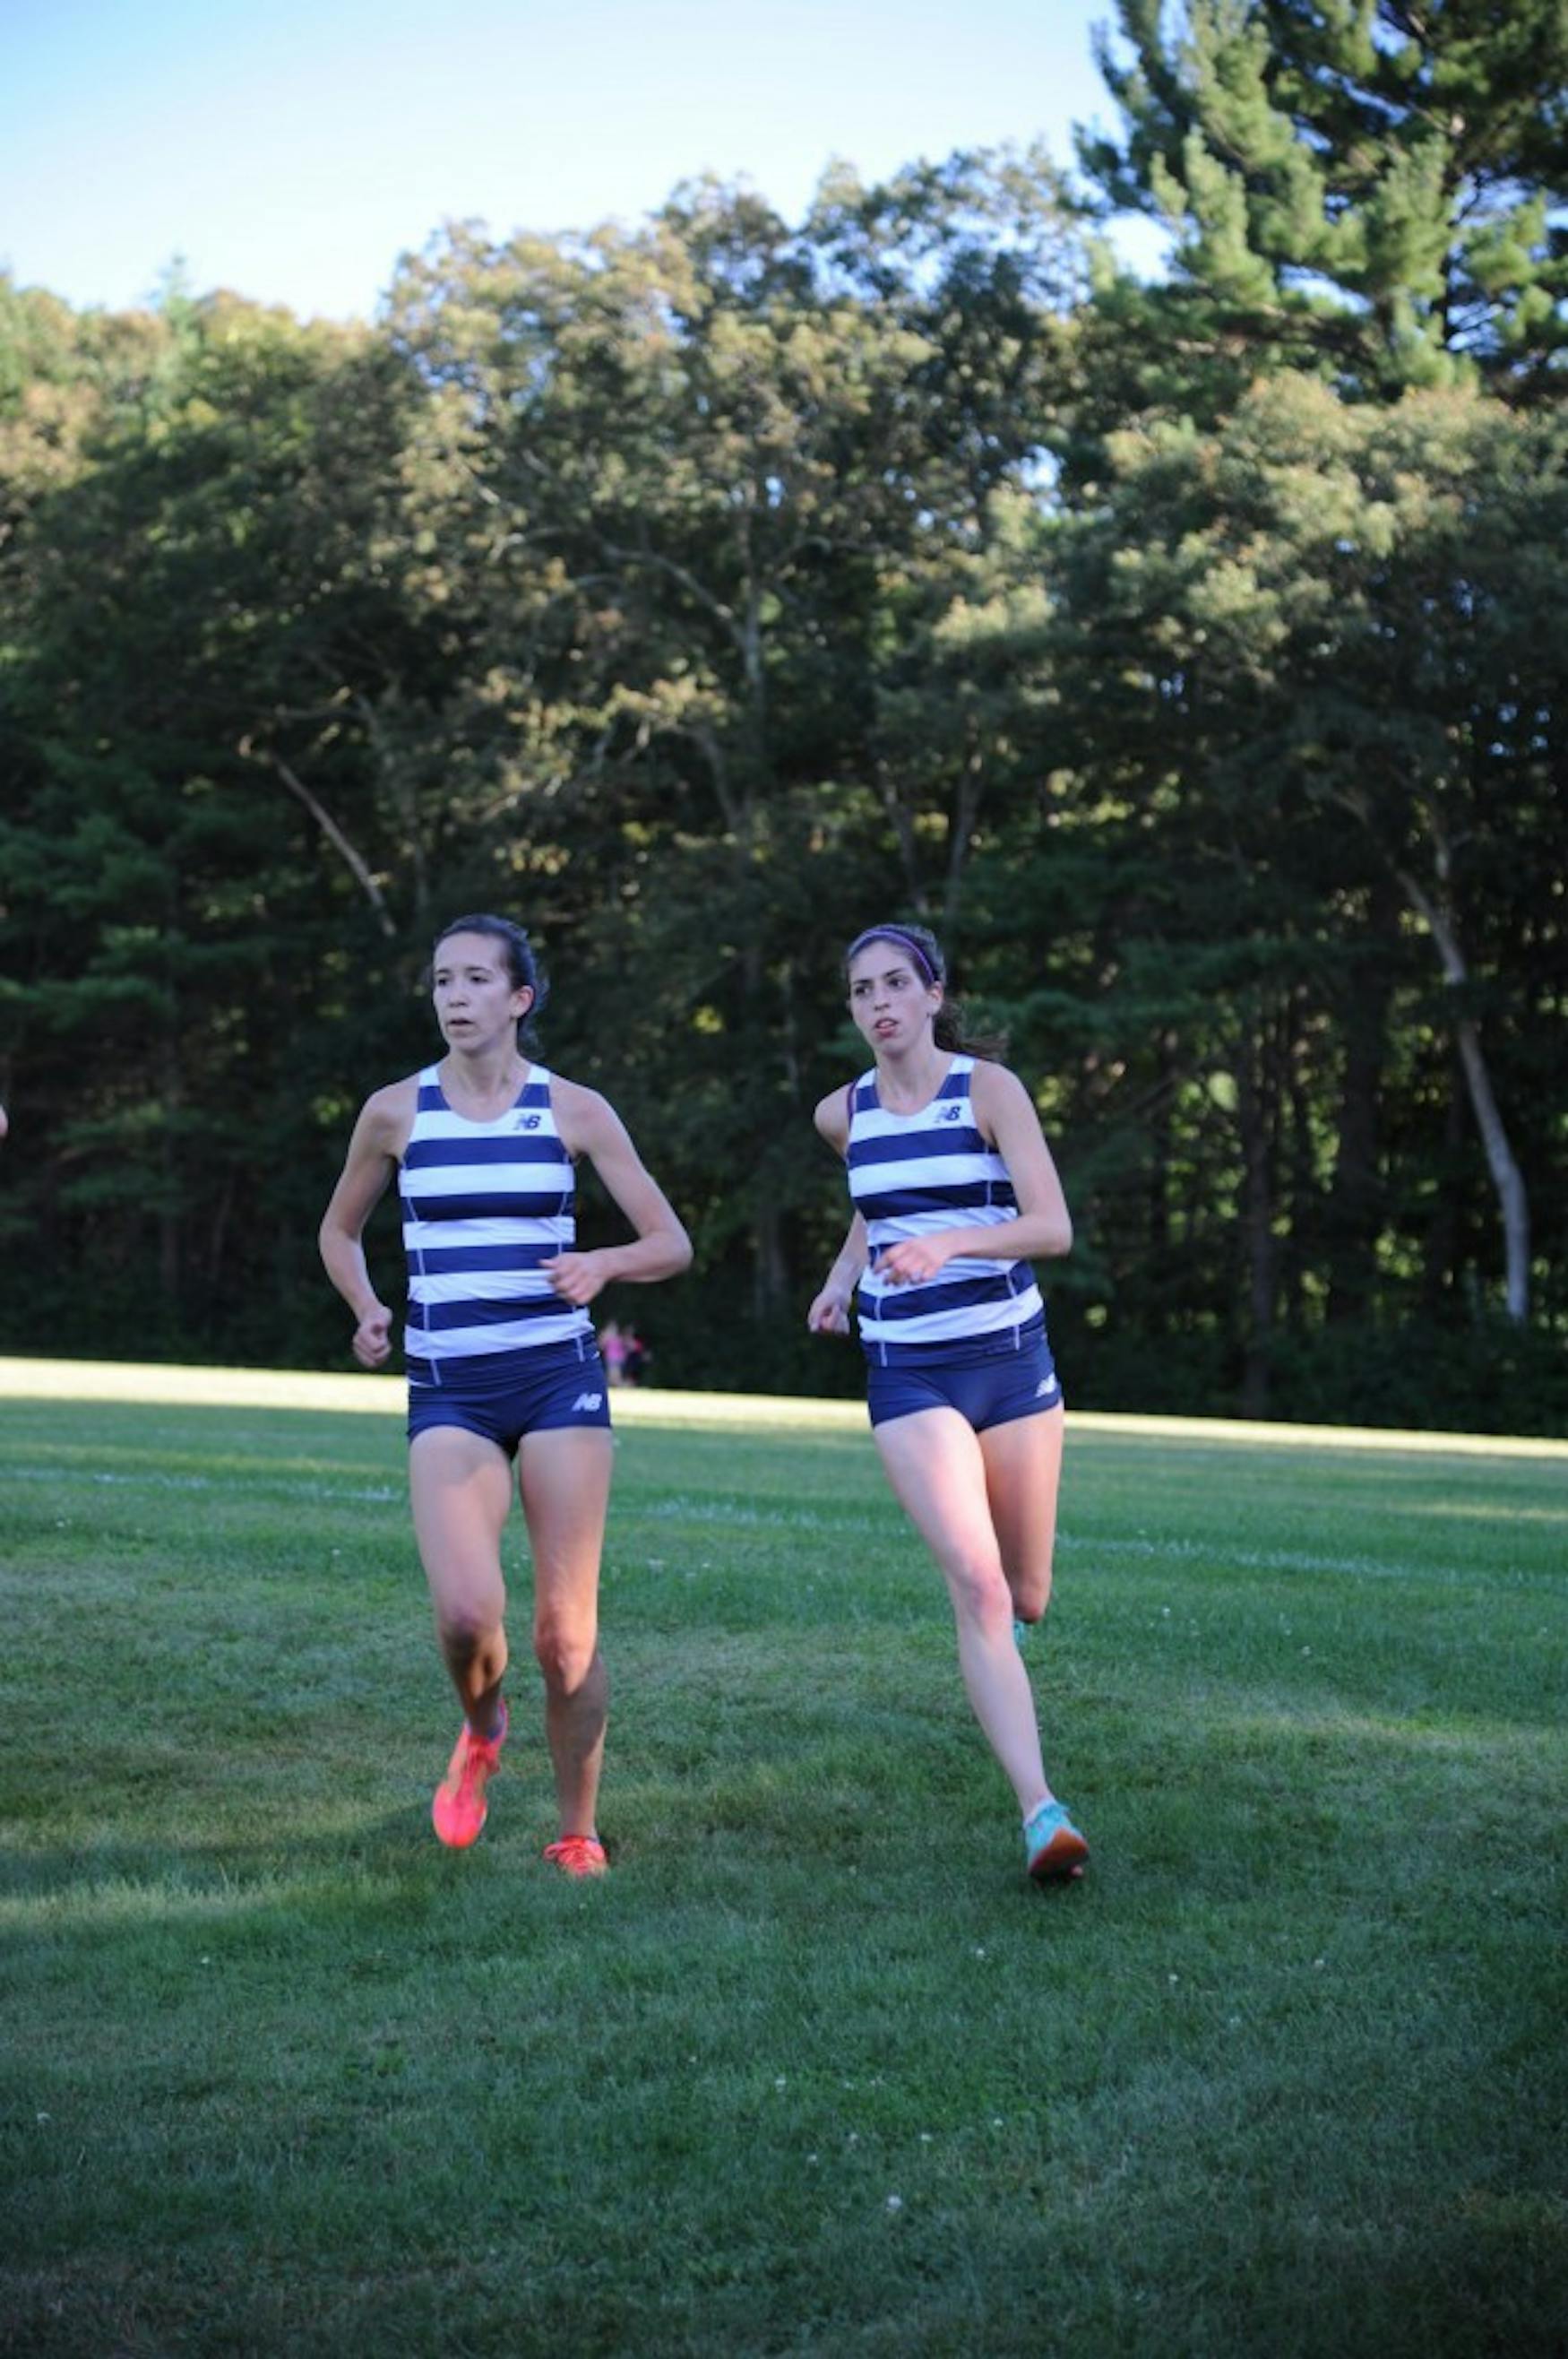 FULL STEAM AHEAD: Kelsey Whitaker ’16 (left), shown at a meet earlier this year, took second in the 1,500-meter run last Friday.